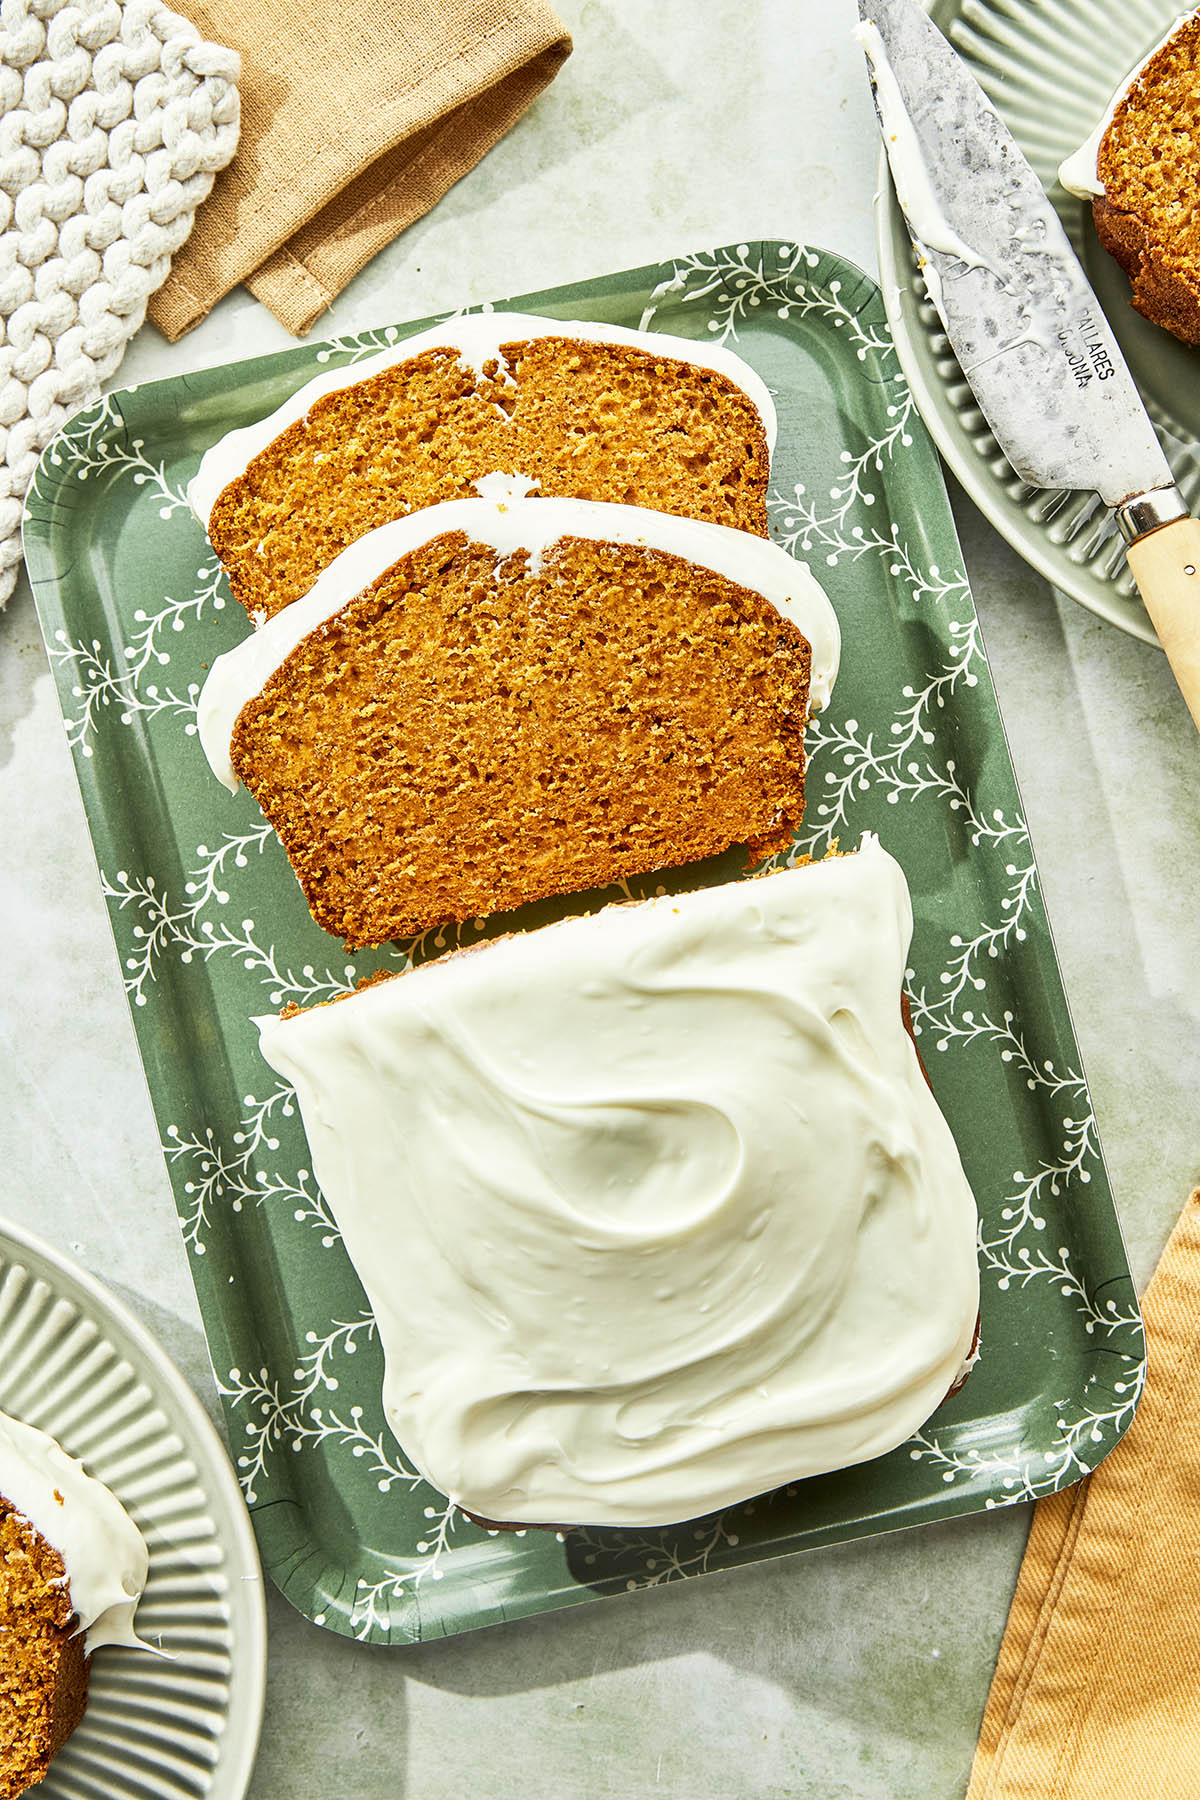 Pumpkin bread with cream cheese frosting on a green decorative tray with two slices showing.